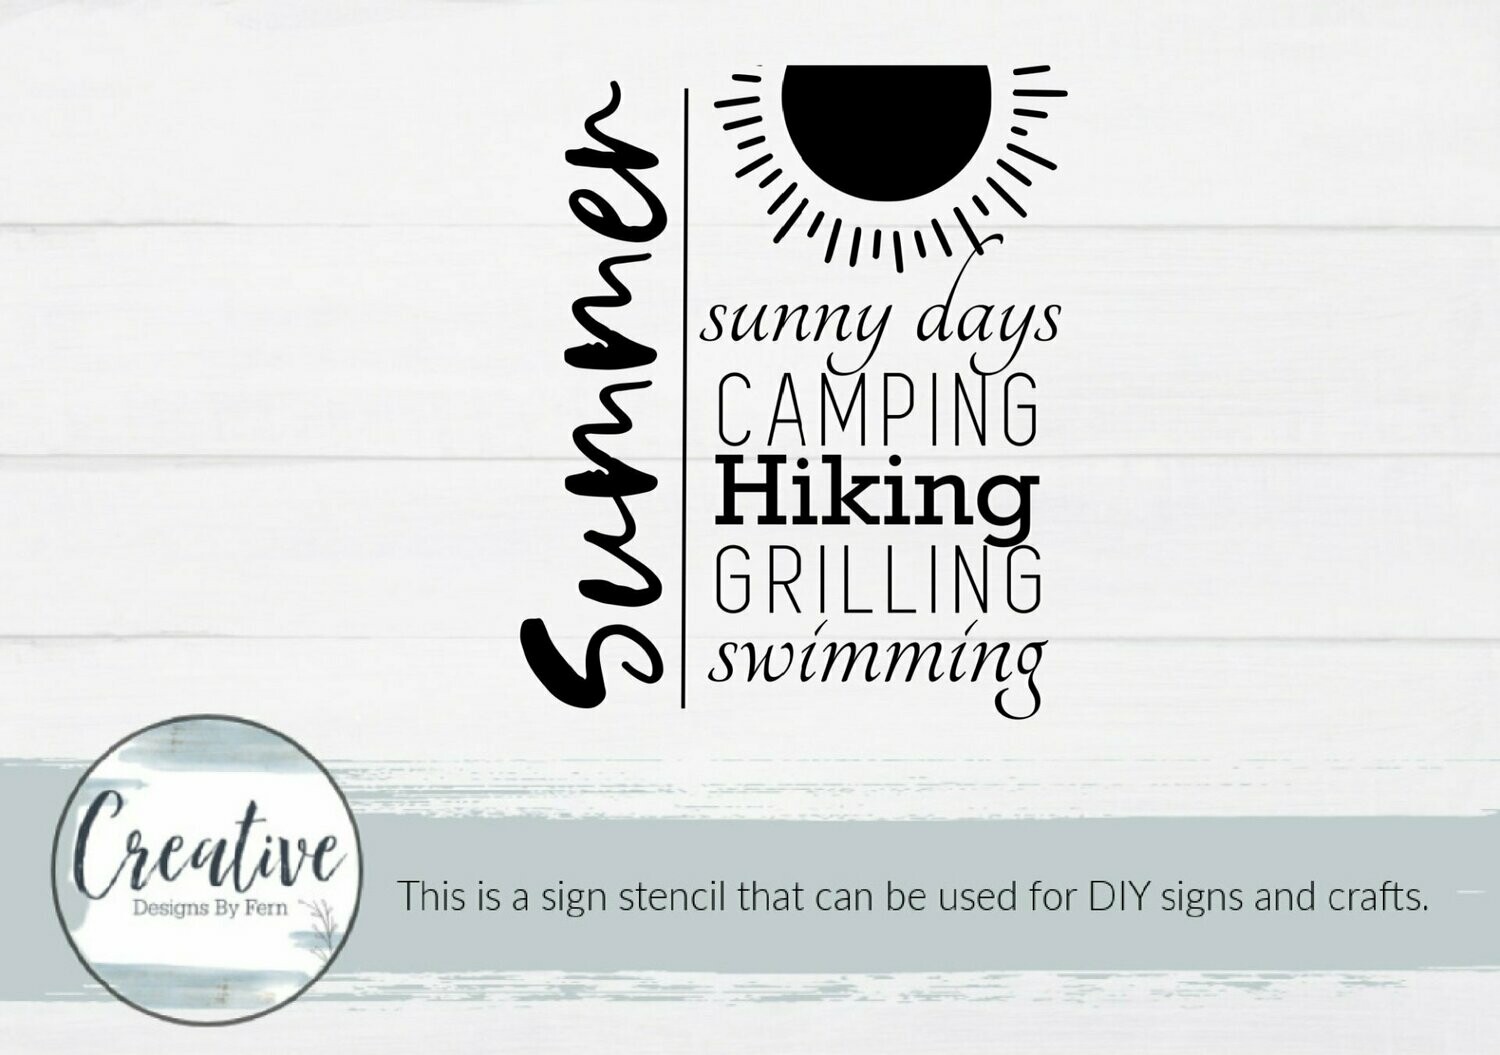 Summer Days, Camping, Hiking, Grilling, Swimming Sign Stencil, Stencil or Decal: Sign Stencil, Size: 12" x 10"